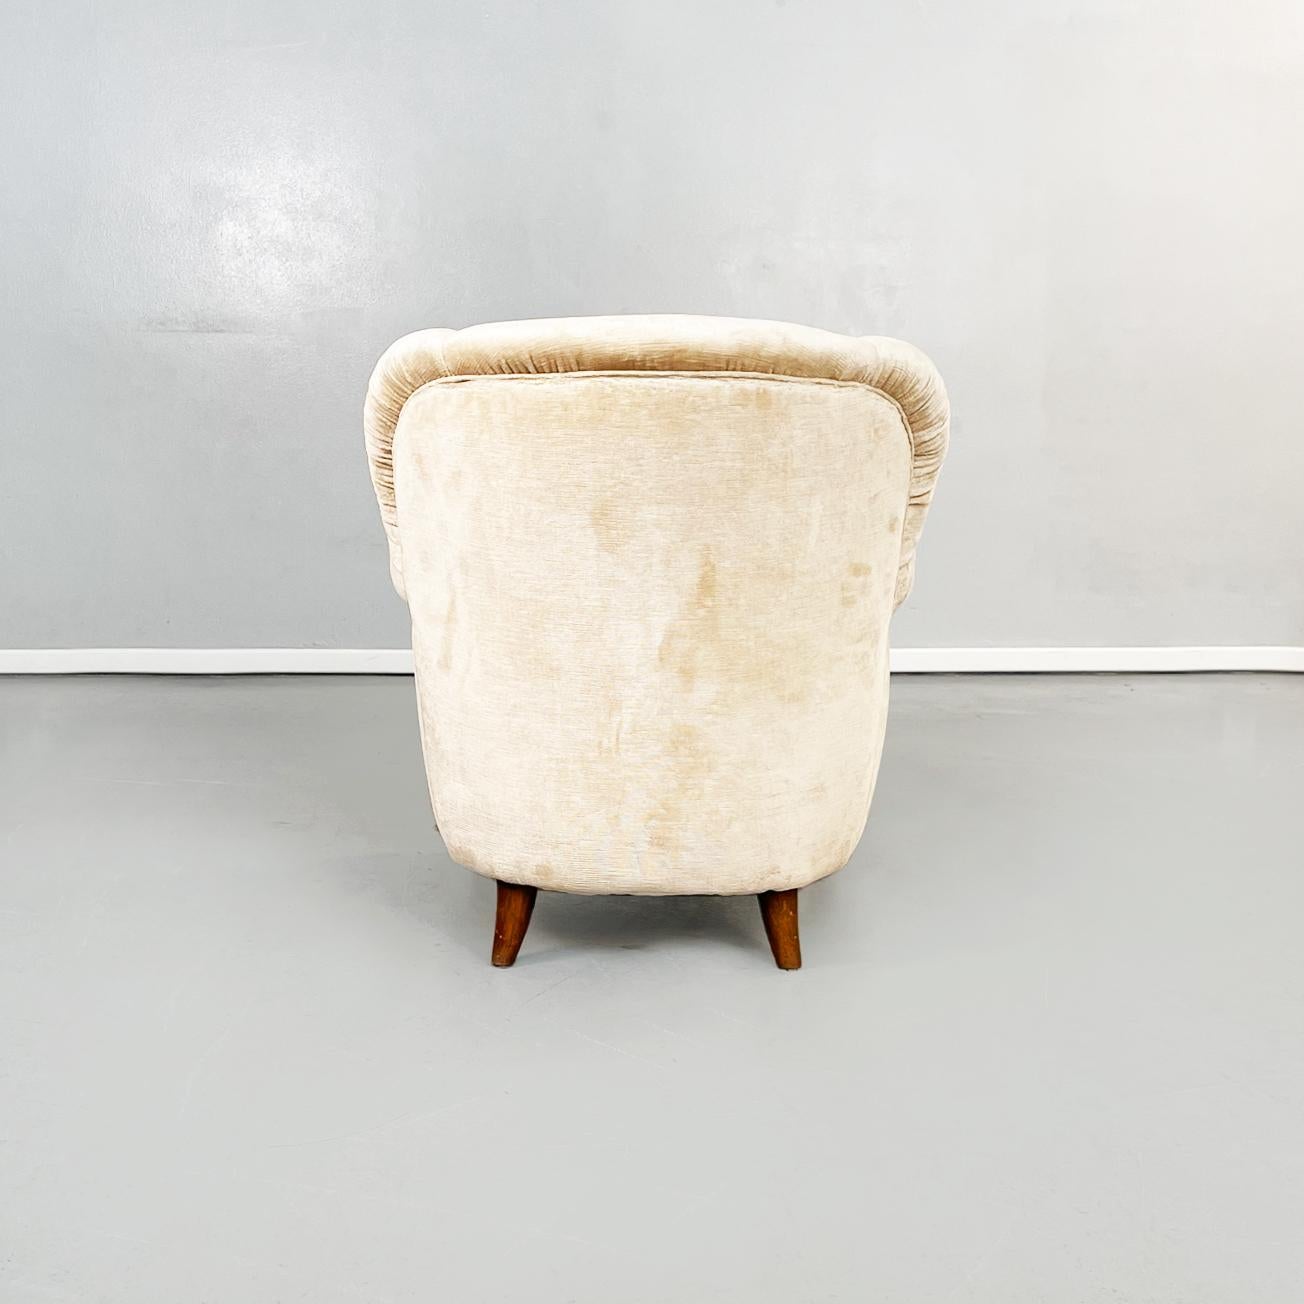 Mid-20th Century Italian Mid-Century Modern Wooden Armchairs in Beige Fabric, 1960s For Sale